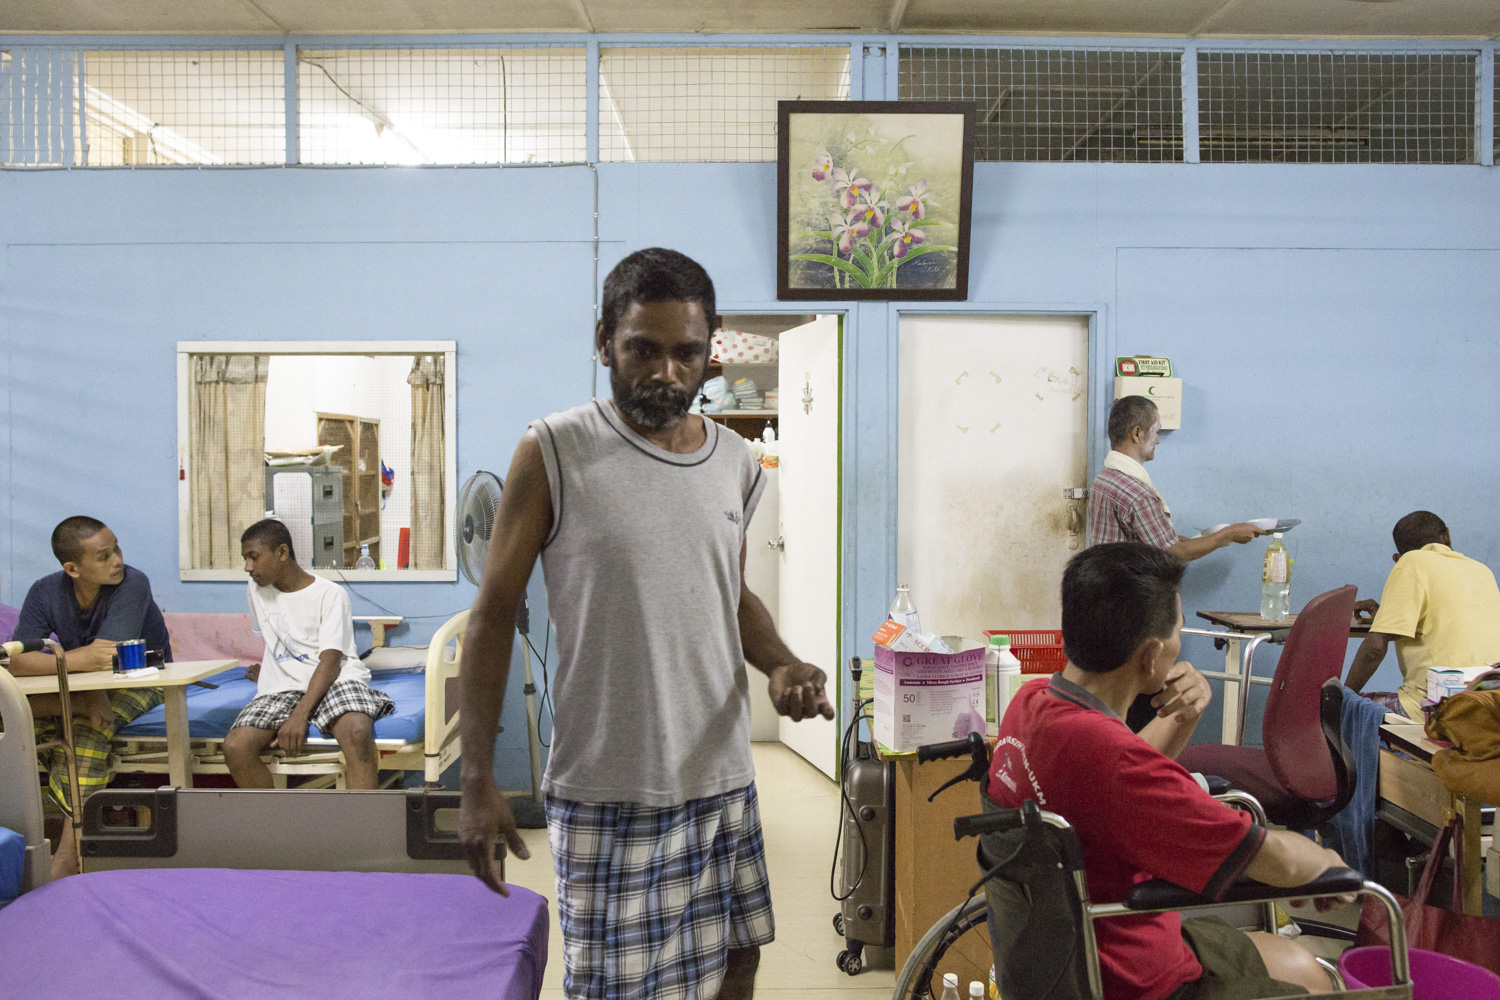 A typical scene in the evening at the sick bay. Kumaran used to work in a law firm before being diagnosed with HIV. He moved to PLC’s sick bay where he receives nursing care after developing a stroke.